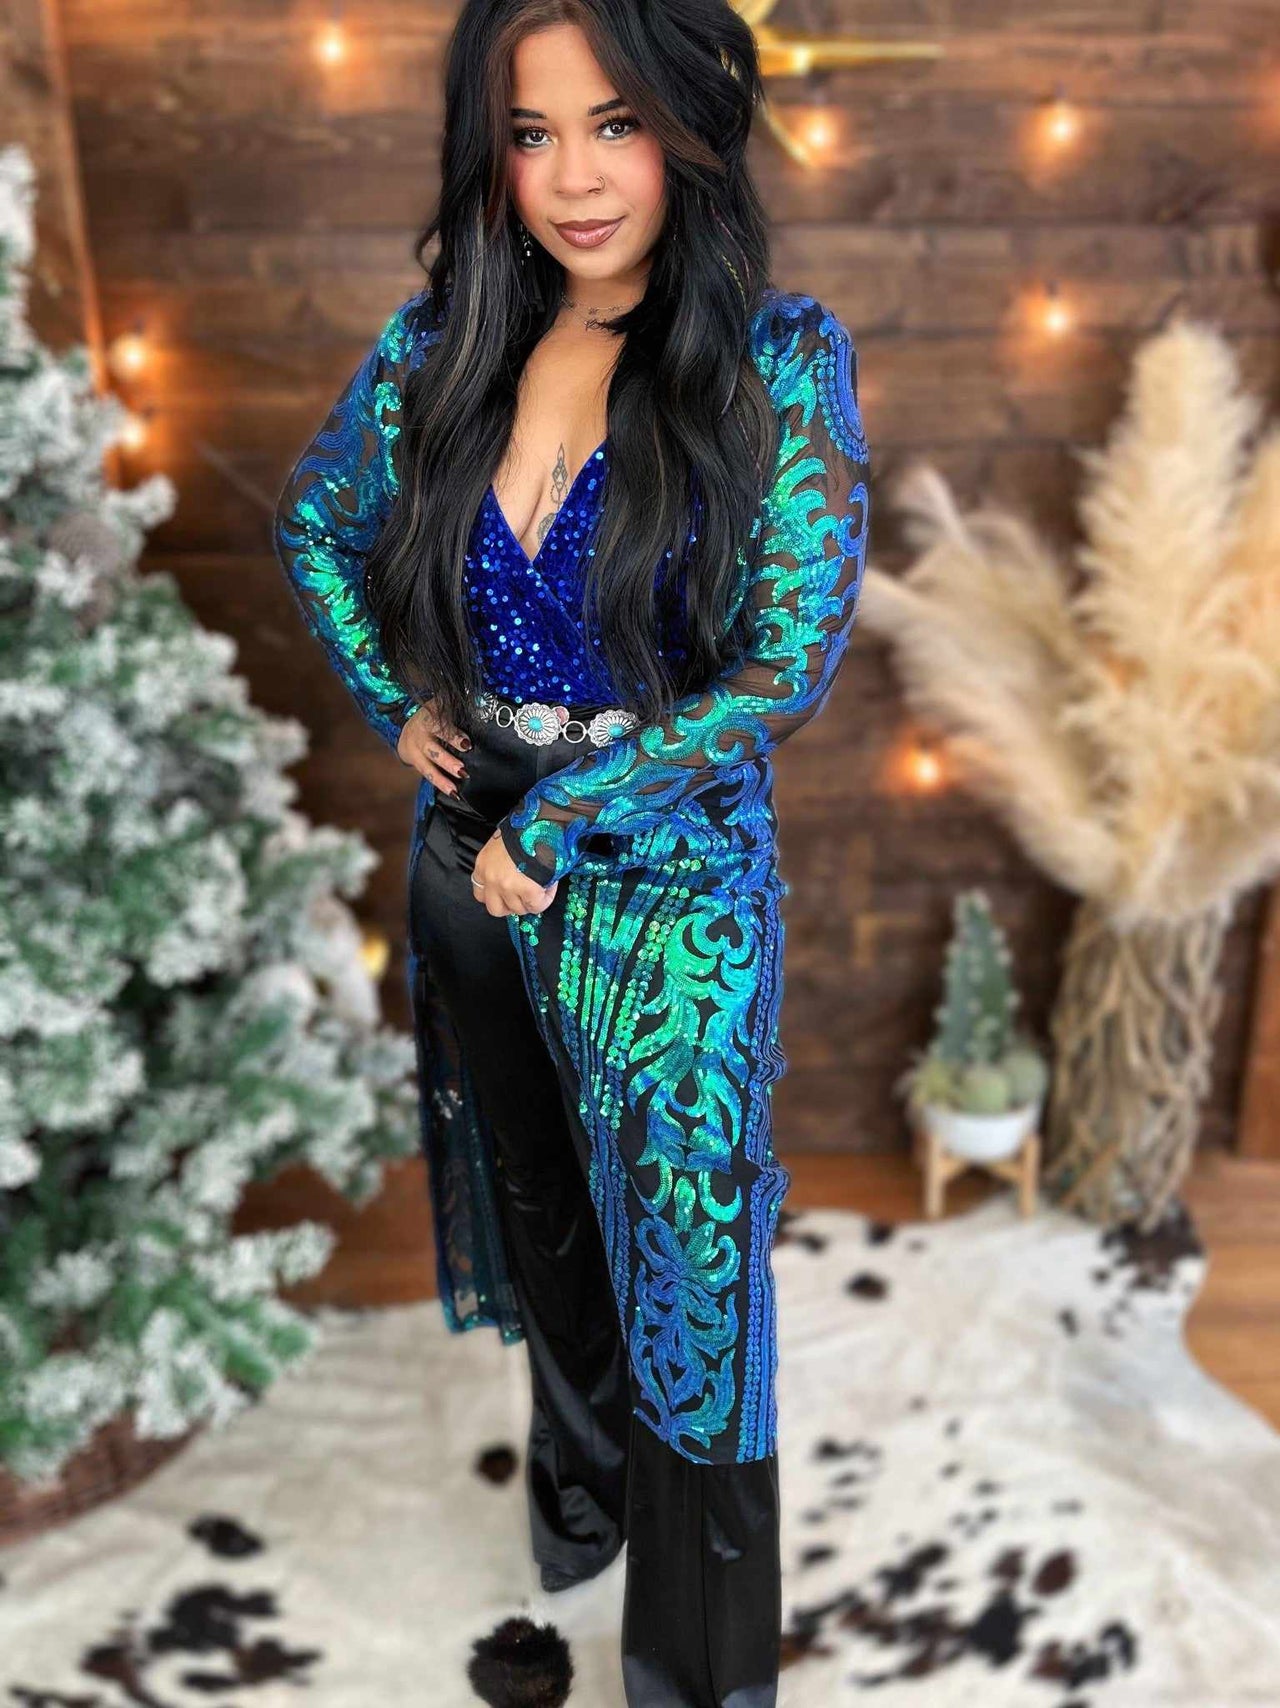 The Royal Sequin Duster - Turquoise on Black